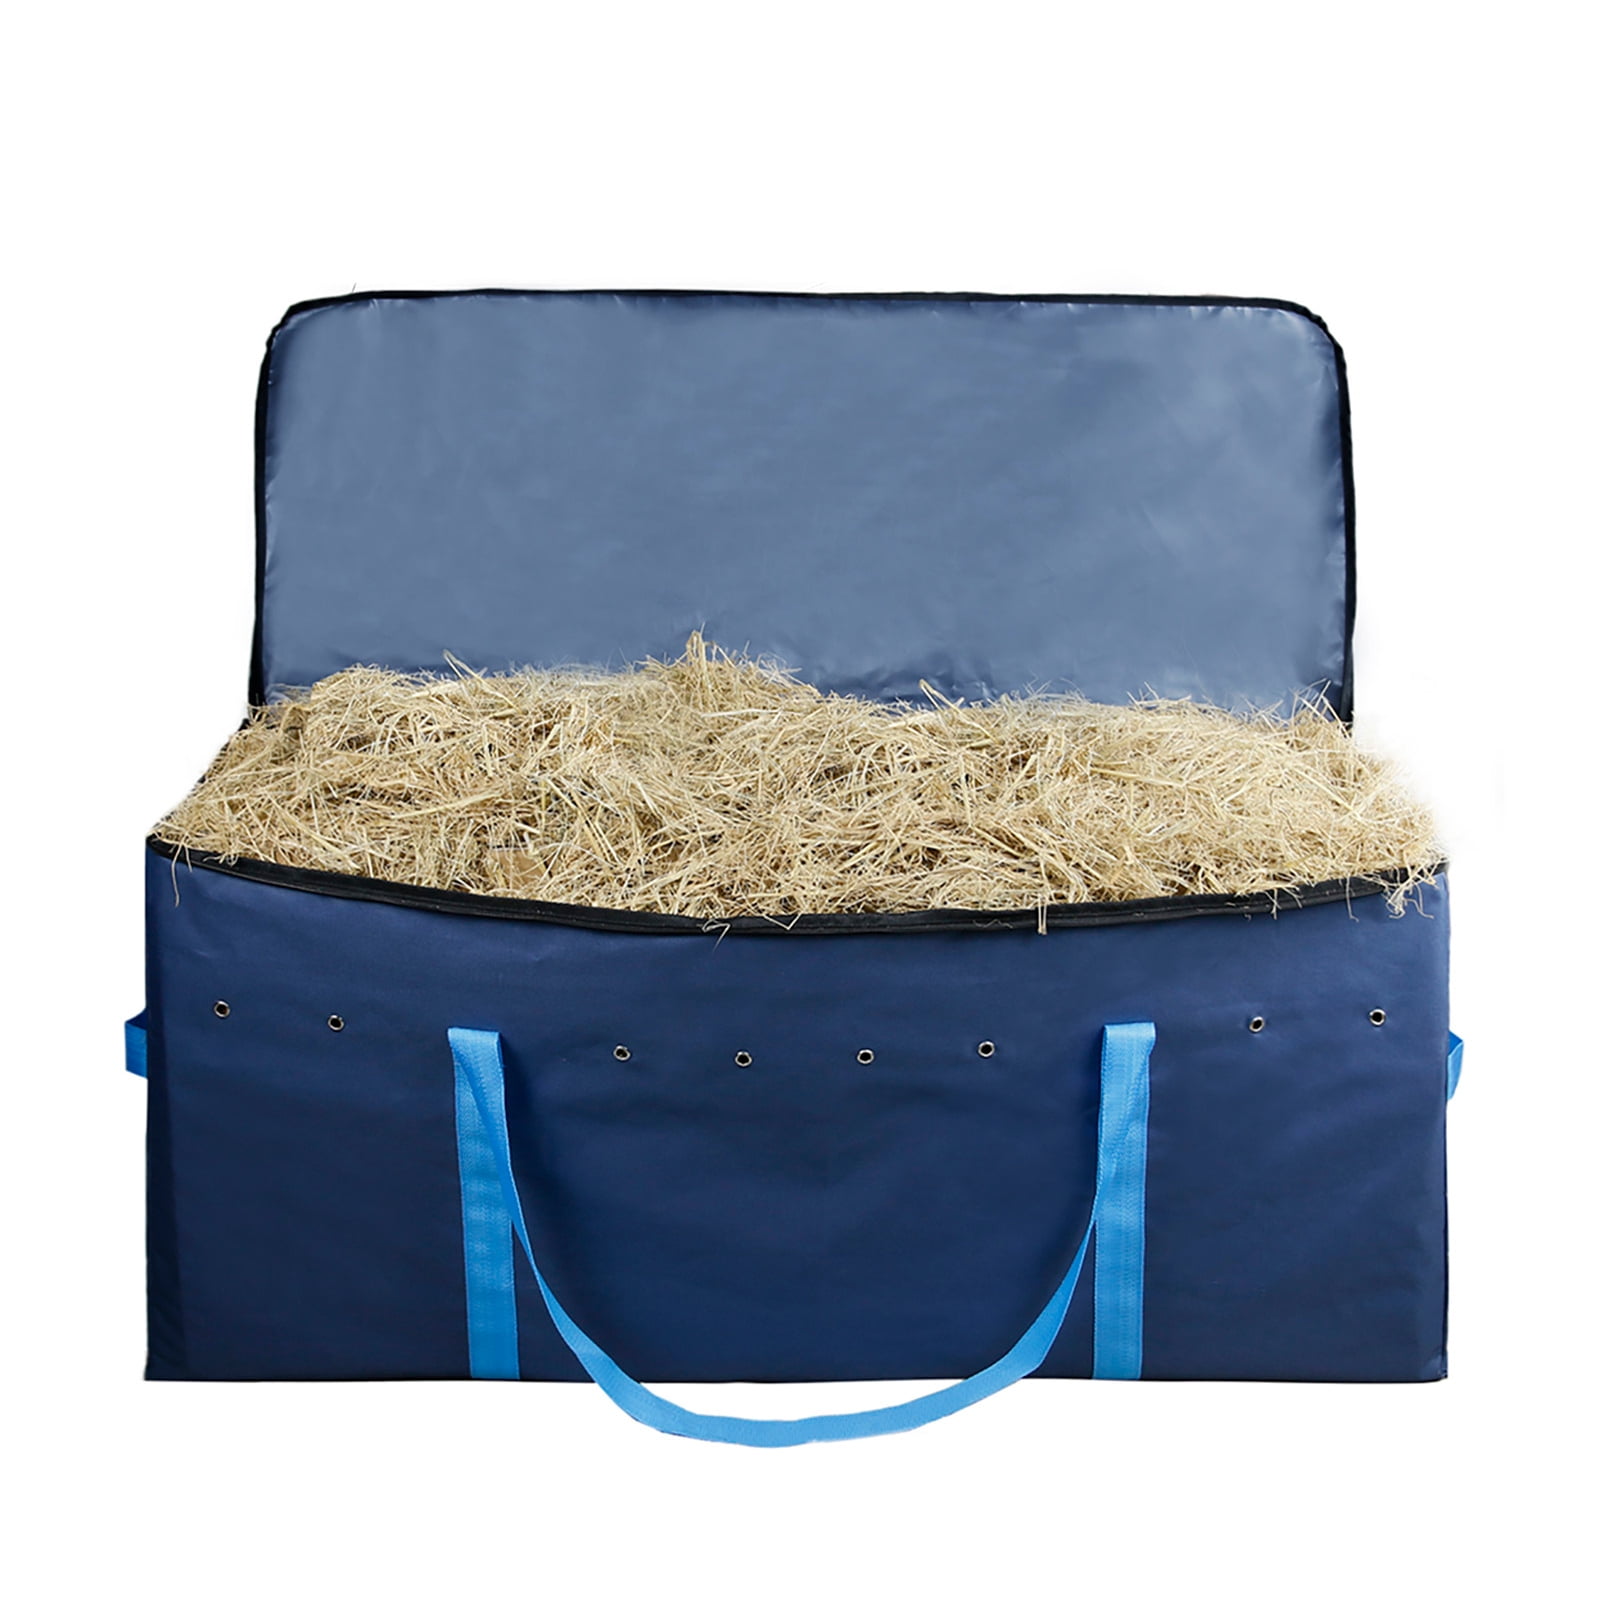 Foldable Portable Horse and Livestock Hay Bale Bags with Zipper Waterproof RETYLY Hay Bale Storage Bag Extra Large Tote Hay Bale Carry Bag